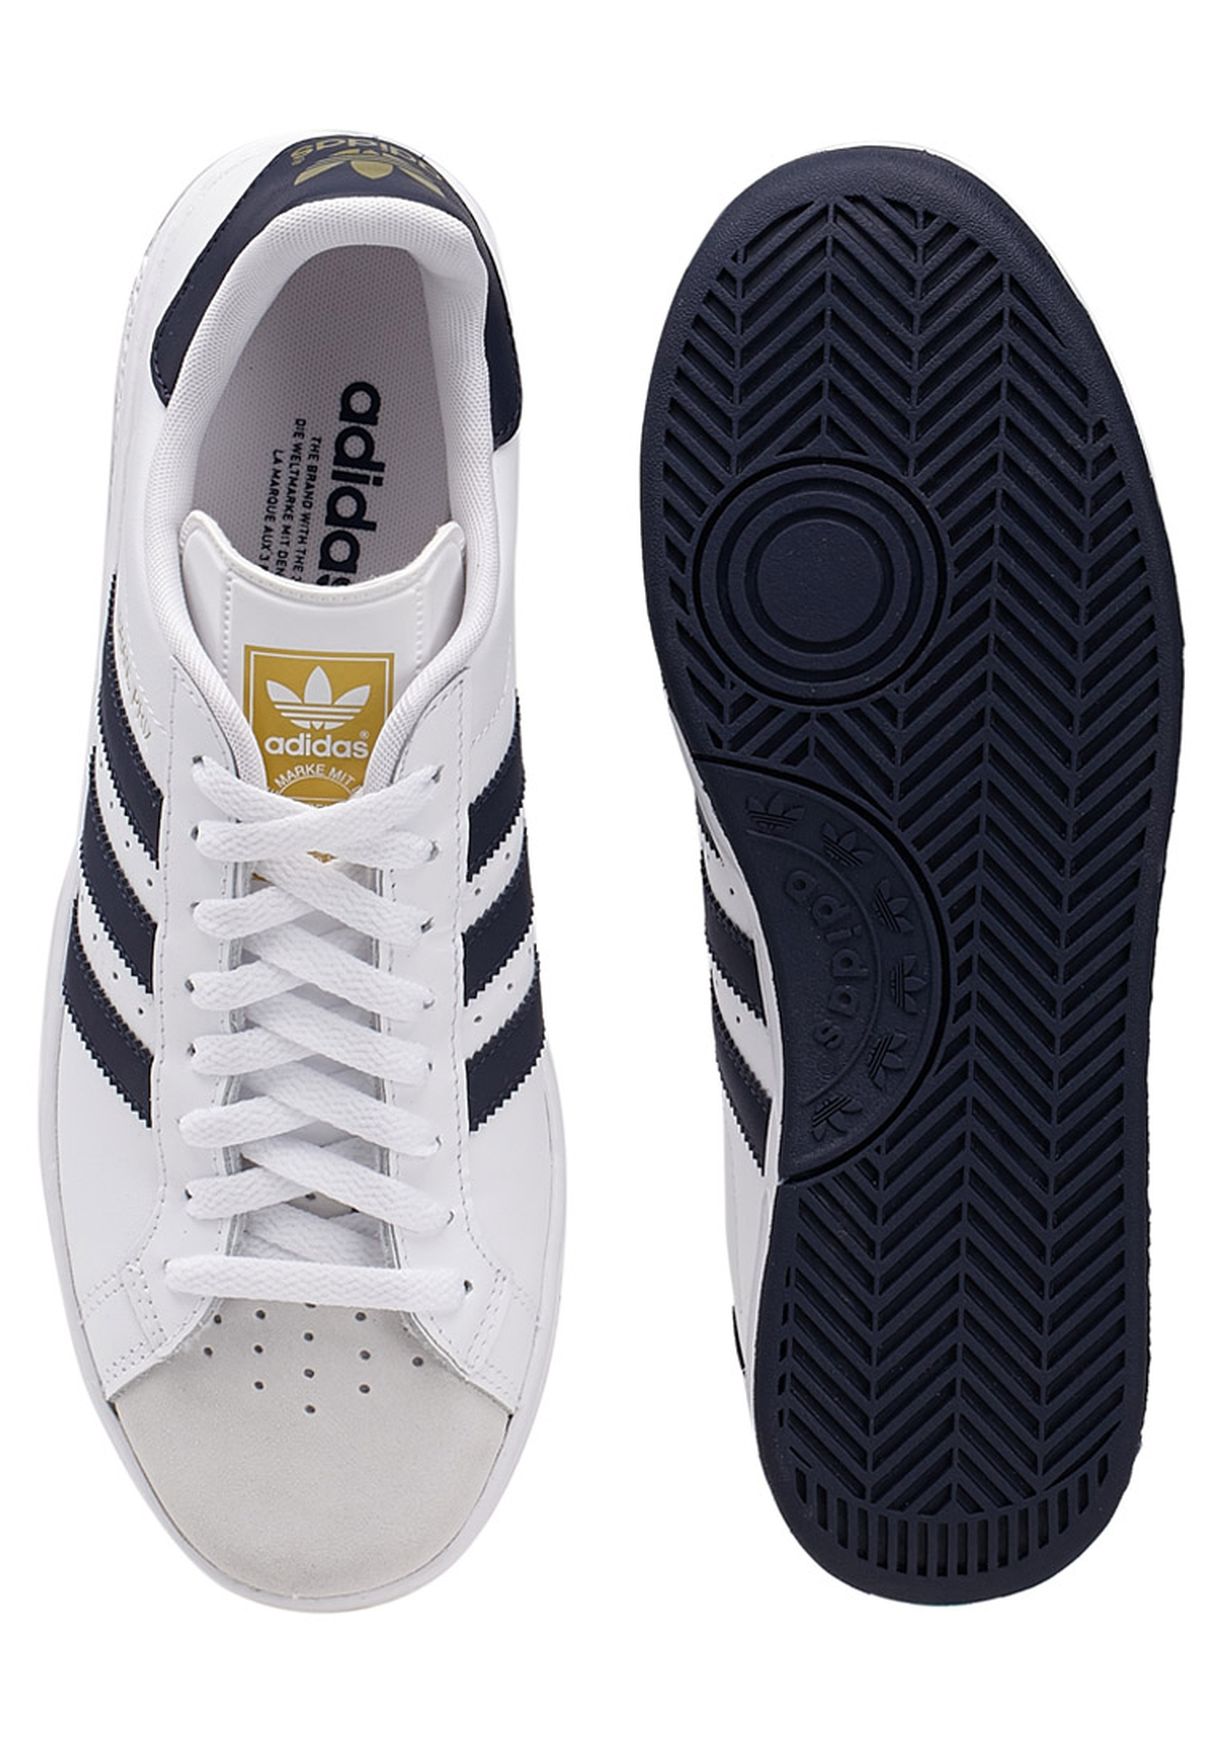 adidas grand prix shoes for sale